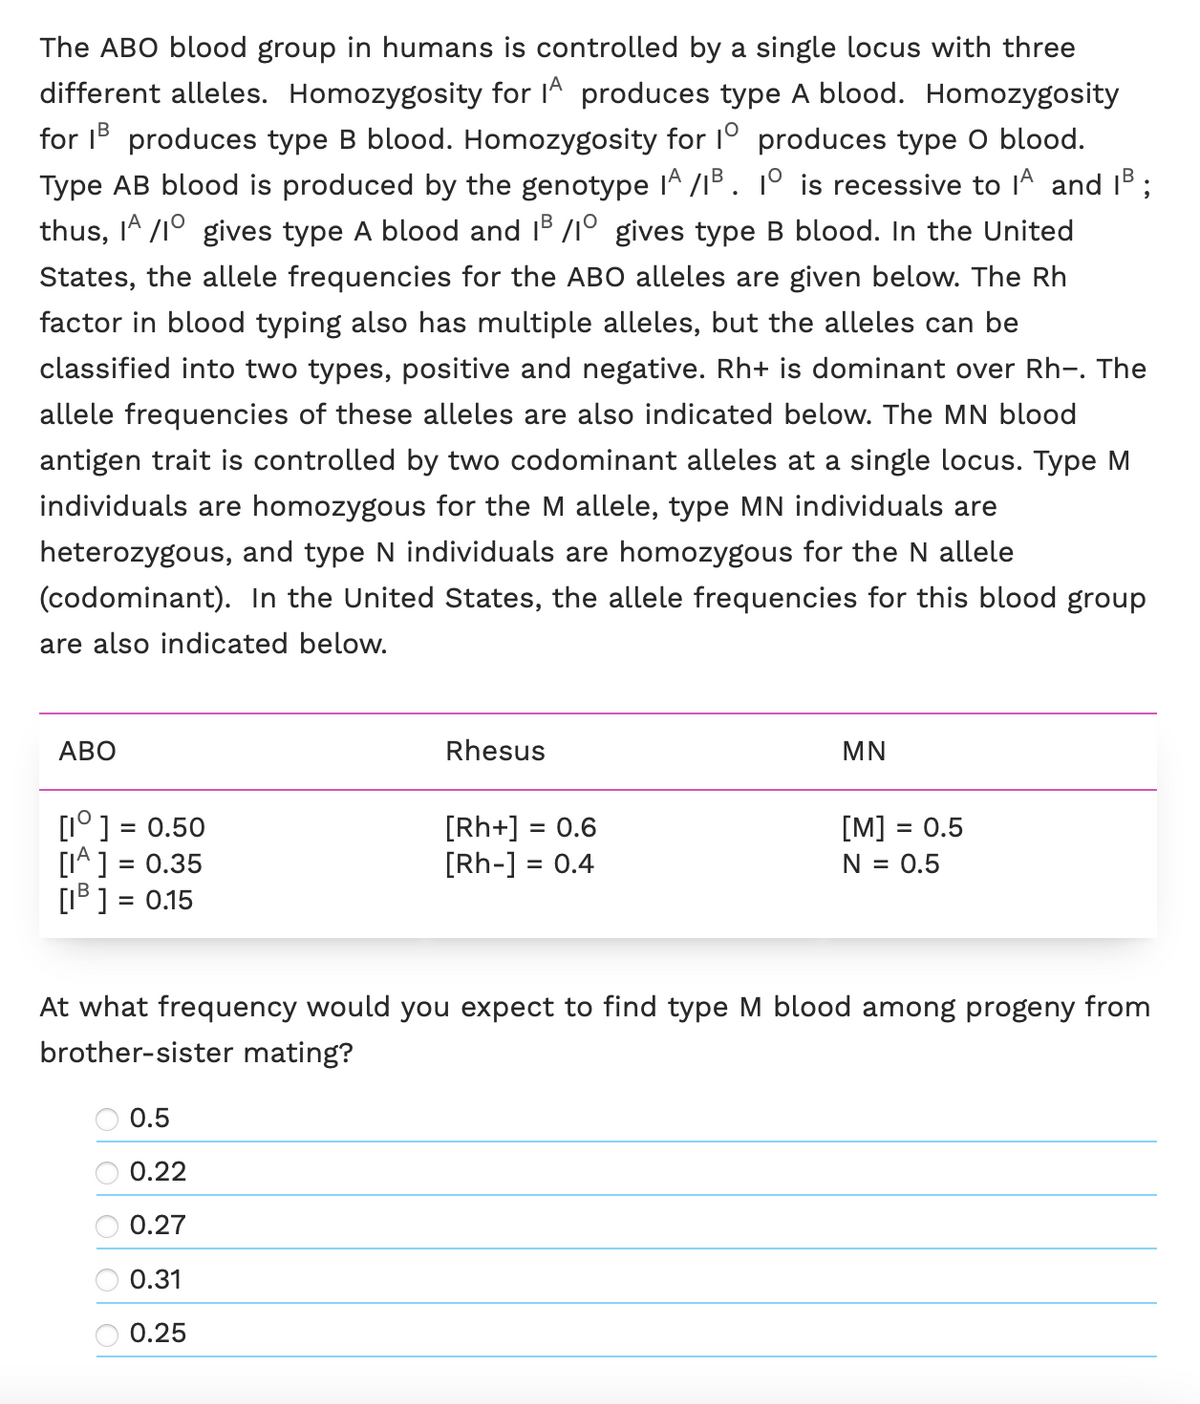 A
The ABO blood group in humans is controlled by a single locus with three
different alleles. Homozygosity for ª produces type A blood. Homozygosity
for B produces type B blood. Homozygosity for 10 produces type O blood.
Type AB blood is produced by the genotype Iª /1³. 1º is recessive to 1ª and 1³;
thus, ª /10 gives type A blood and 1³/10 gives type B blood. In the United
States, the allele frequencies for the ABO alleles are given below. The Rh
factor in blood typing also has multiple alleles, but the alleles can be
classified into two types, positive and negative. Rh+ is dominant over Rh-. The
allele frequencies of these alleles are also indicated below. The MN blood
antigen trait is controlled by two codominant alleles at a single locus. Type M
individuals are homozygous for the M allele, type MN individuals are
heterozygous, and type N individuals are homozygous for the N allele
(codominant). In the United States, the allele frequencies for this blood group
are also indicated below.
ABO
[10] = 0.50
[IA] = 0.35
[1³] = 0.15
blo
Rhesus
0.5
0.22
0.27
0.31
0.25
[Rh+] = 0.6
[Rh-] = 0.4
MN
At what frequency would you expect to find type M blood among progeny from
brother-sister mating?
[M] = 0.5
N = 0.5